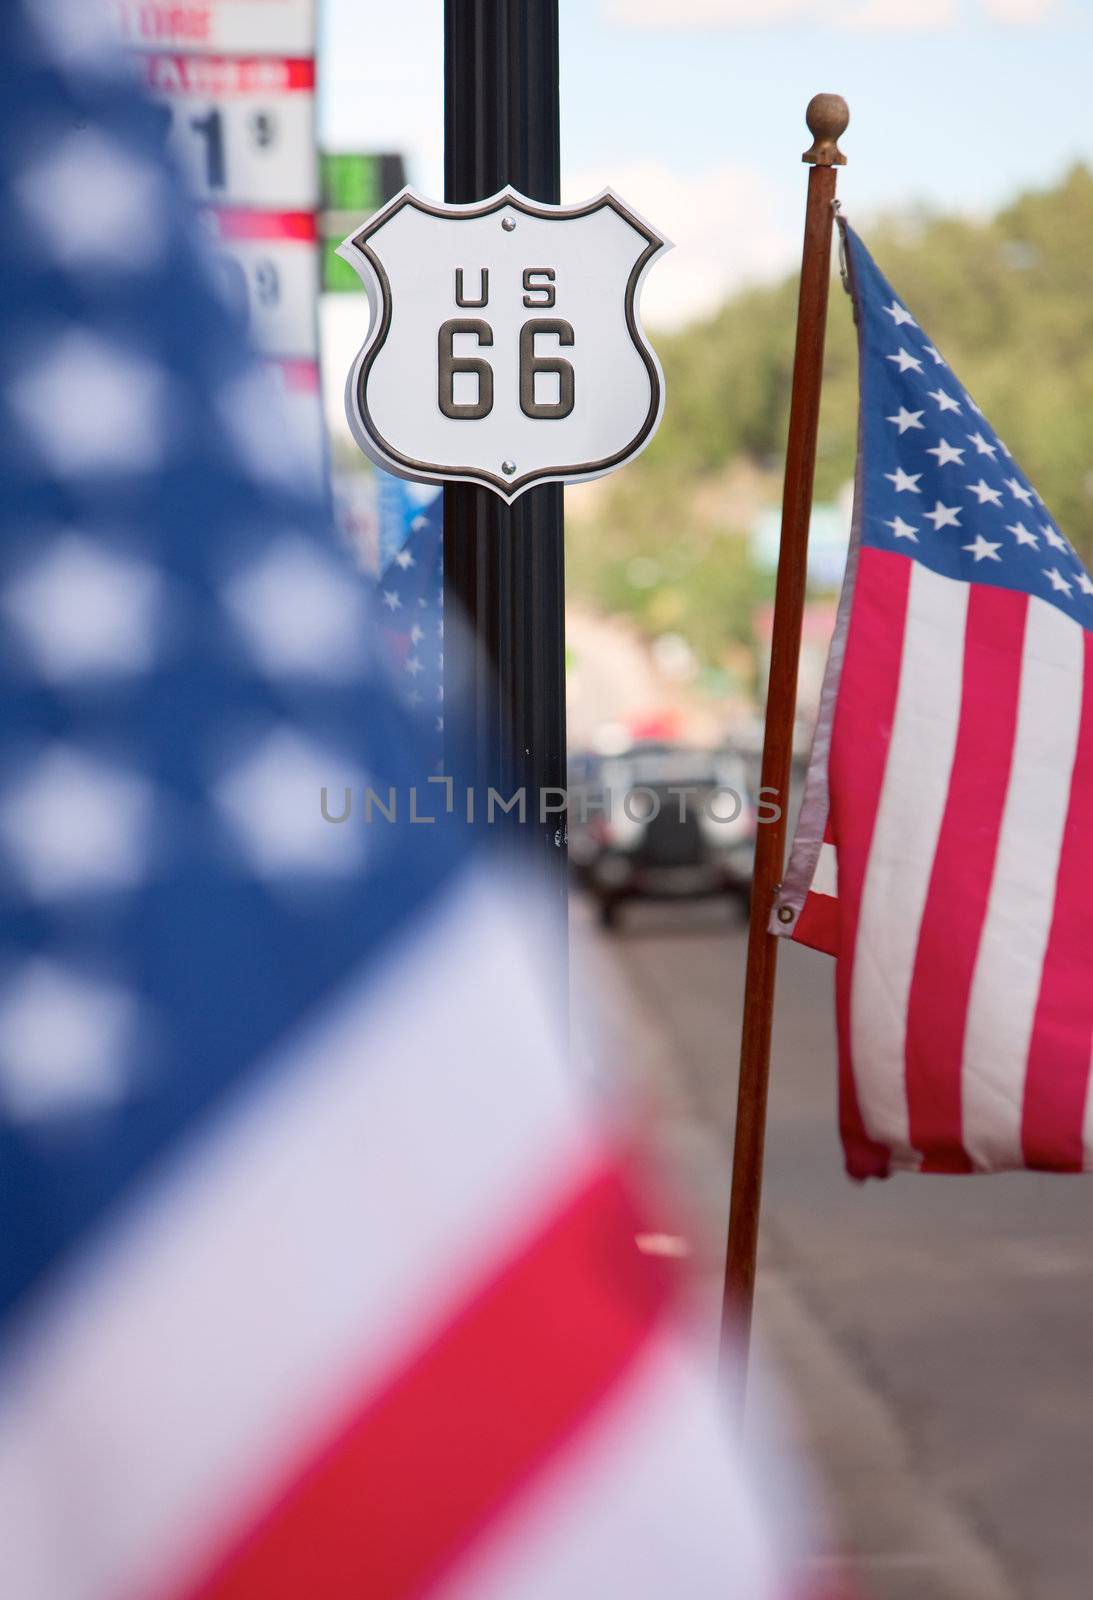 Route 66 sign on side of road with American flags